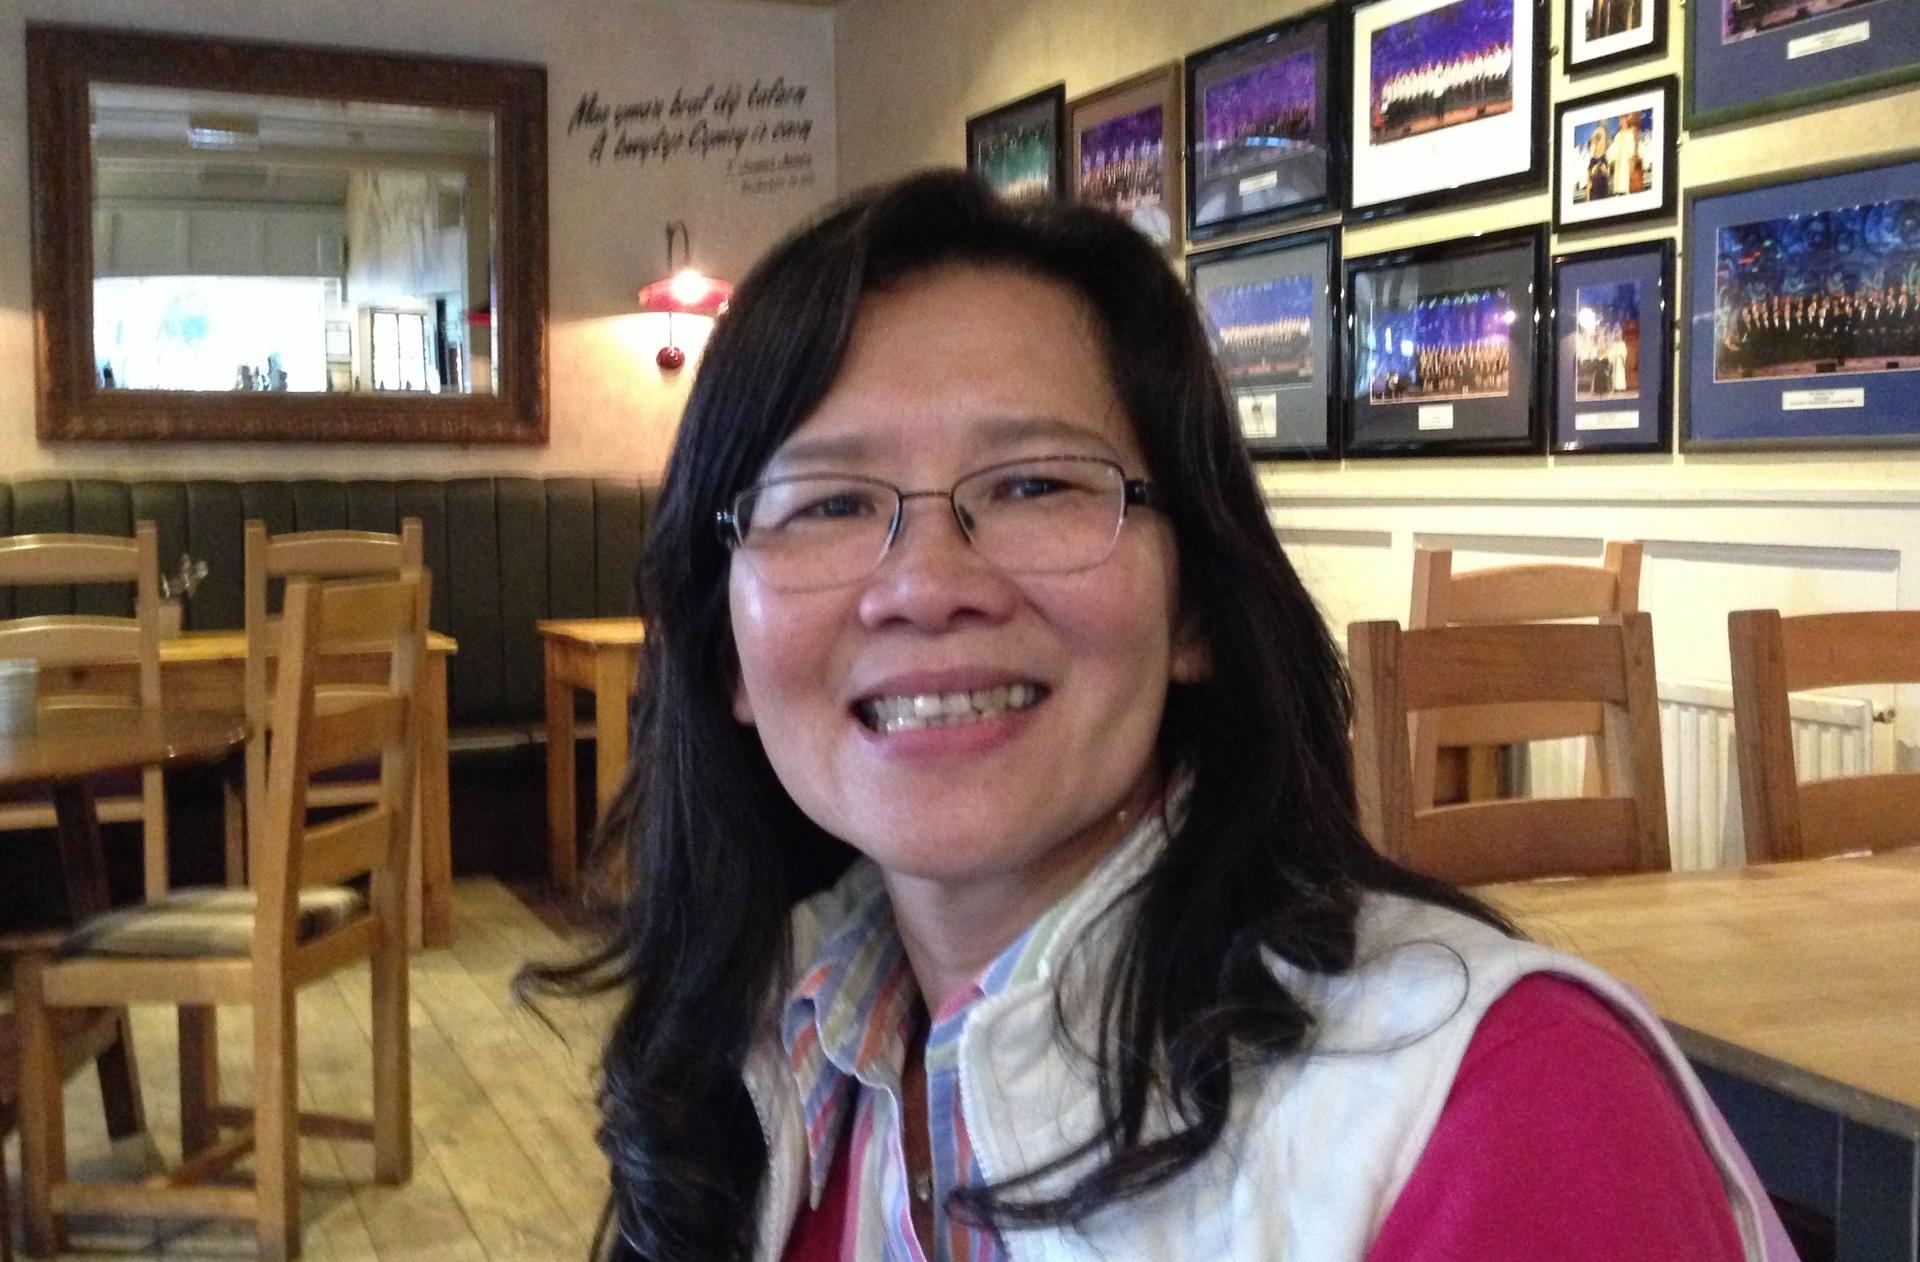 Esther Leman, originally from Indonesia, is learning Welsh.